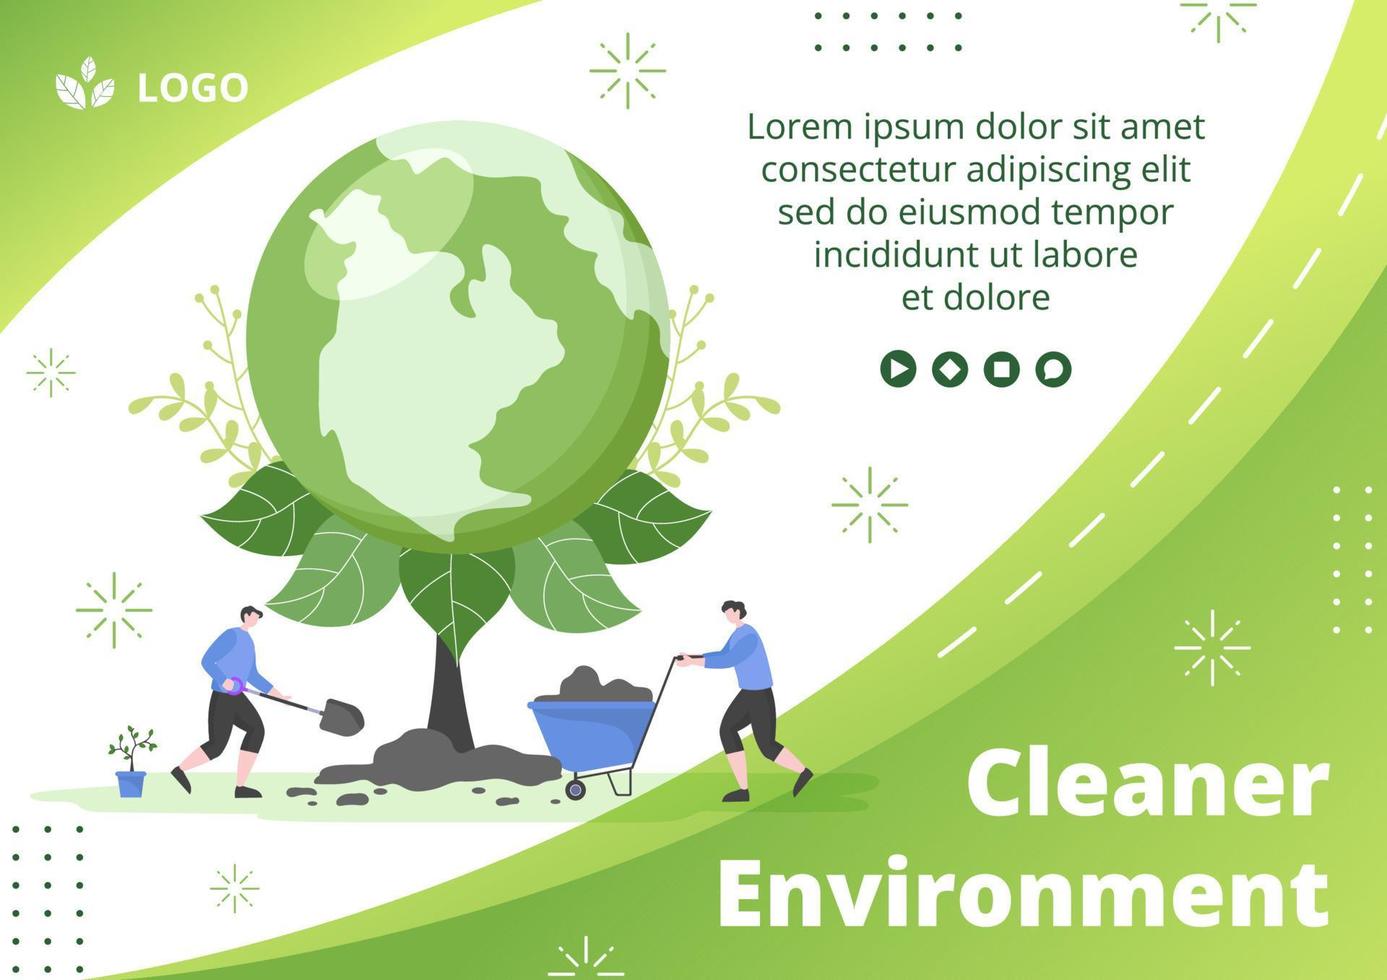 Save Planet Earth Brochure Template Flat Design Environment With Eco Friendly Editable Illustration Square Background to Social Media or Greeting Card vector